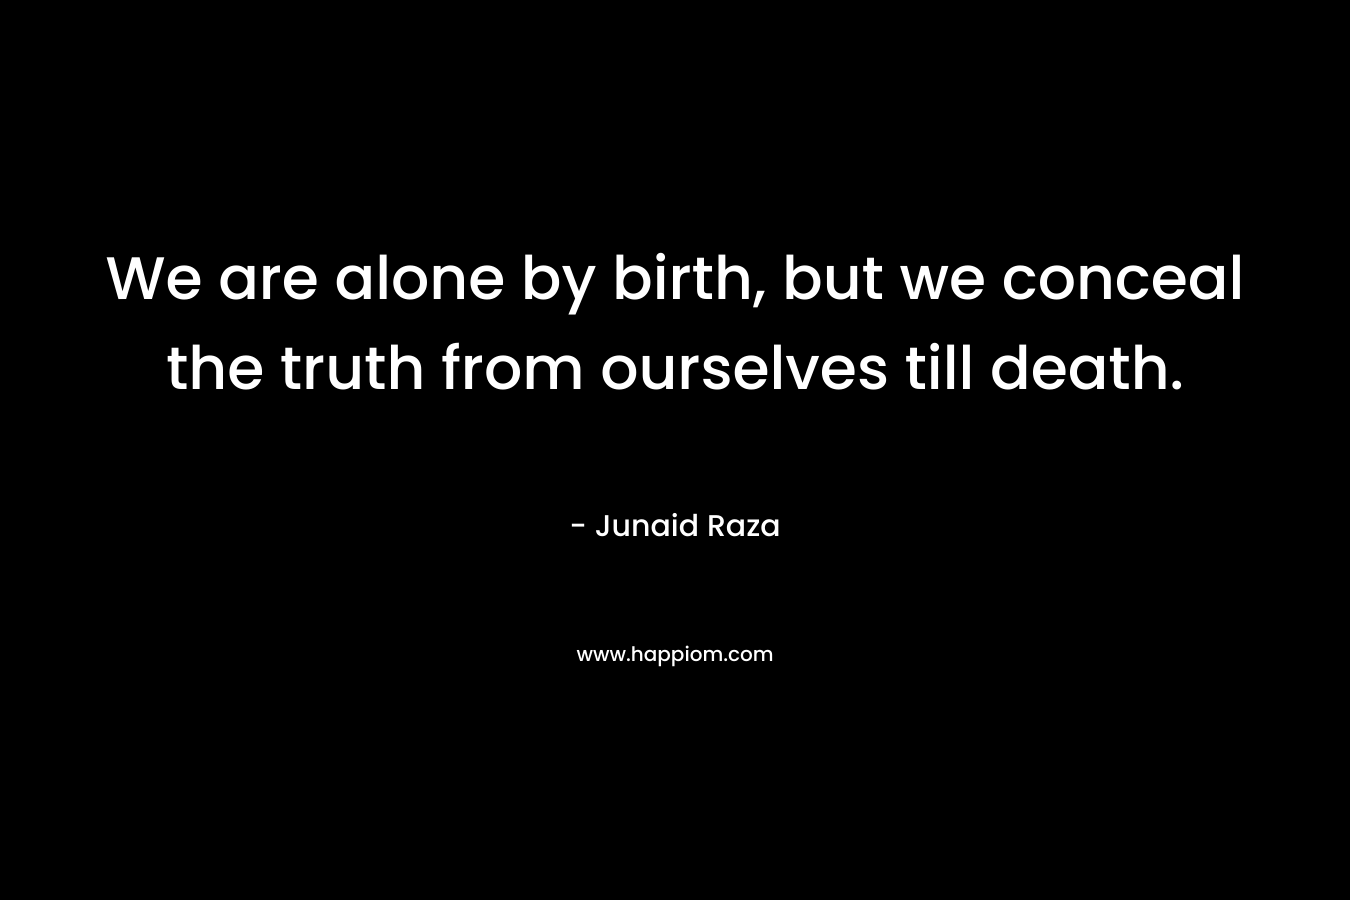 We are alone by birth, but we conceal the truth from ourselves till death.